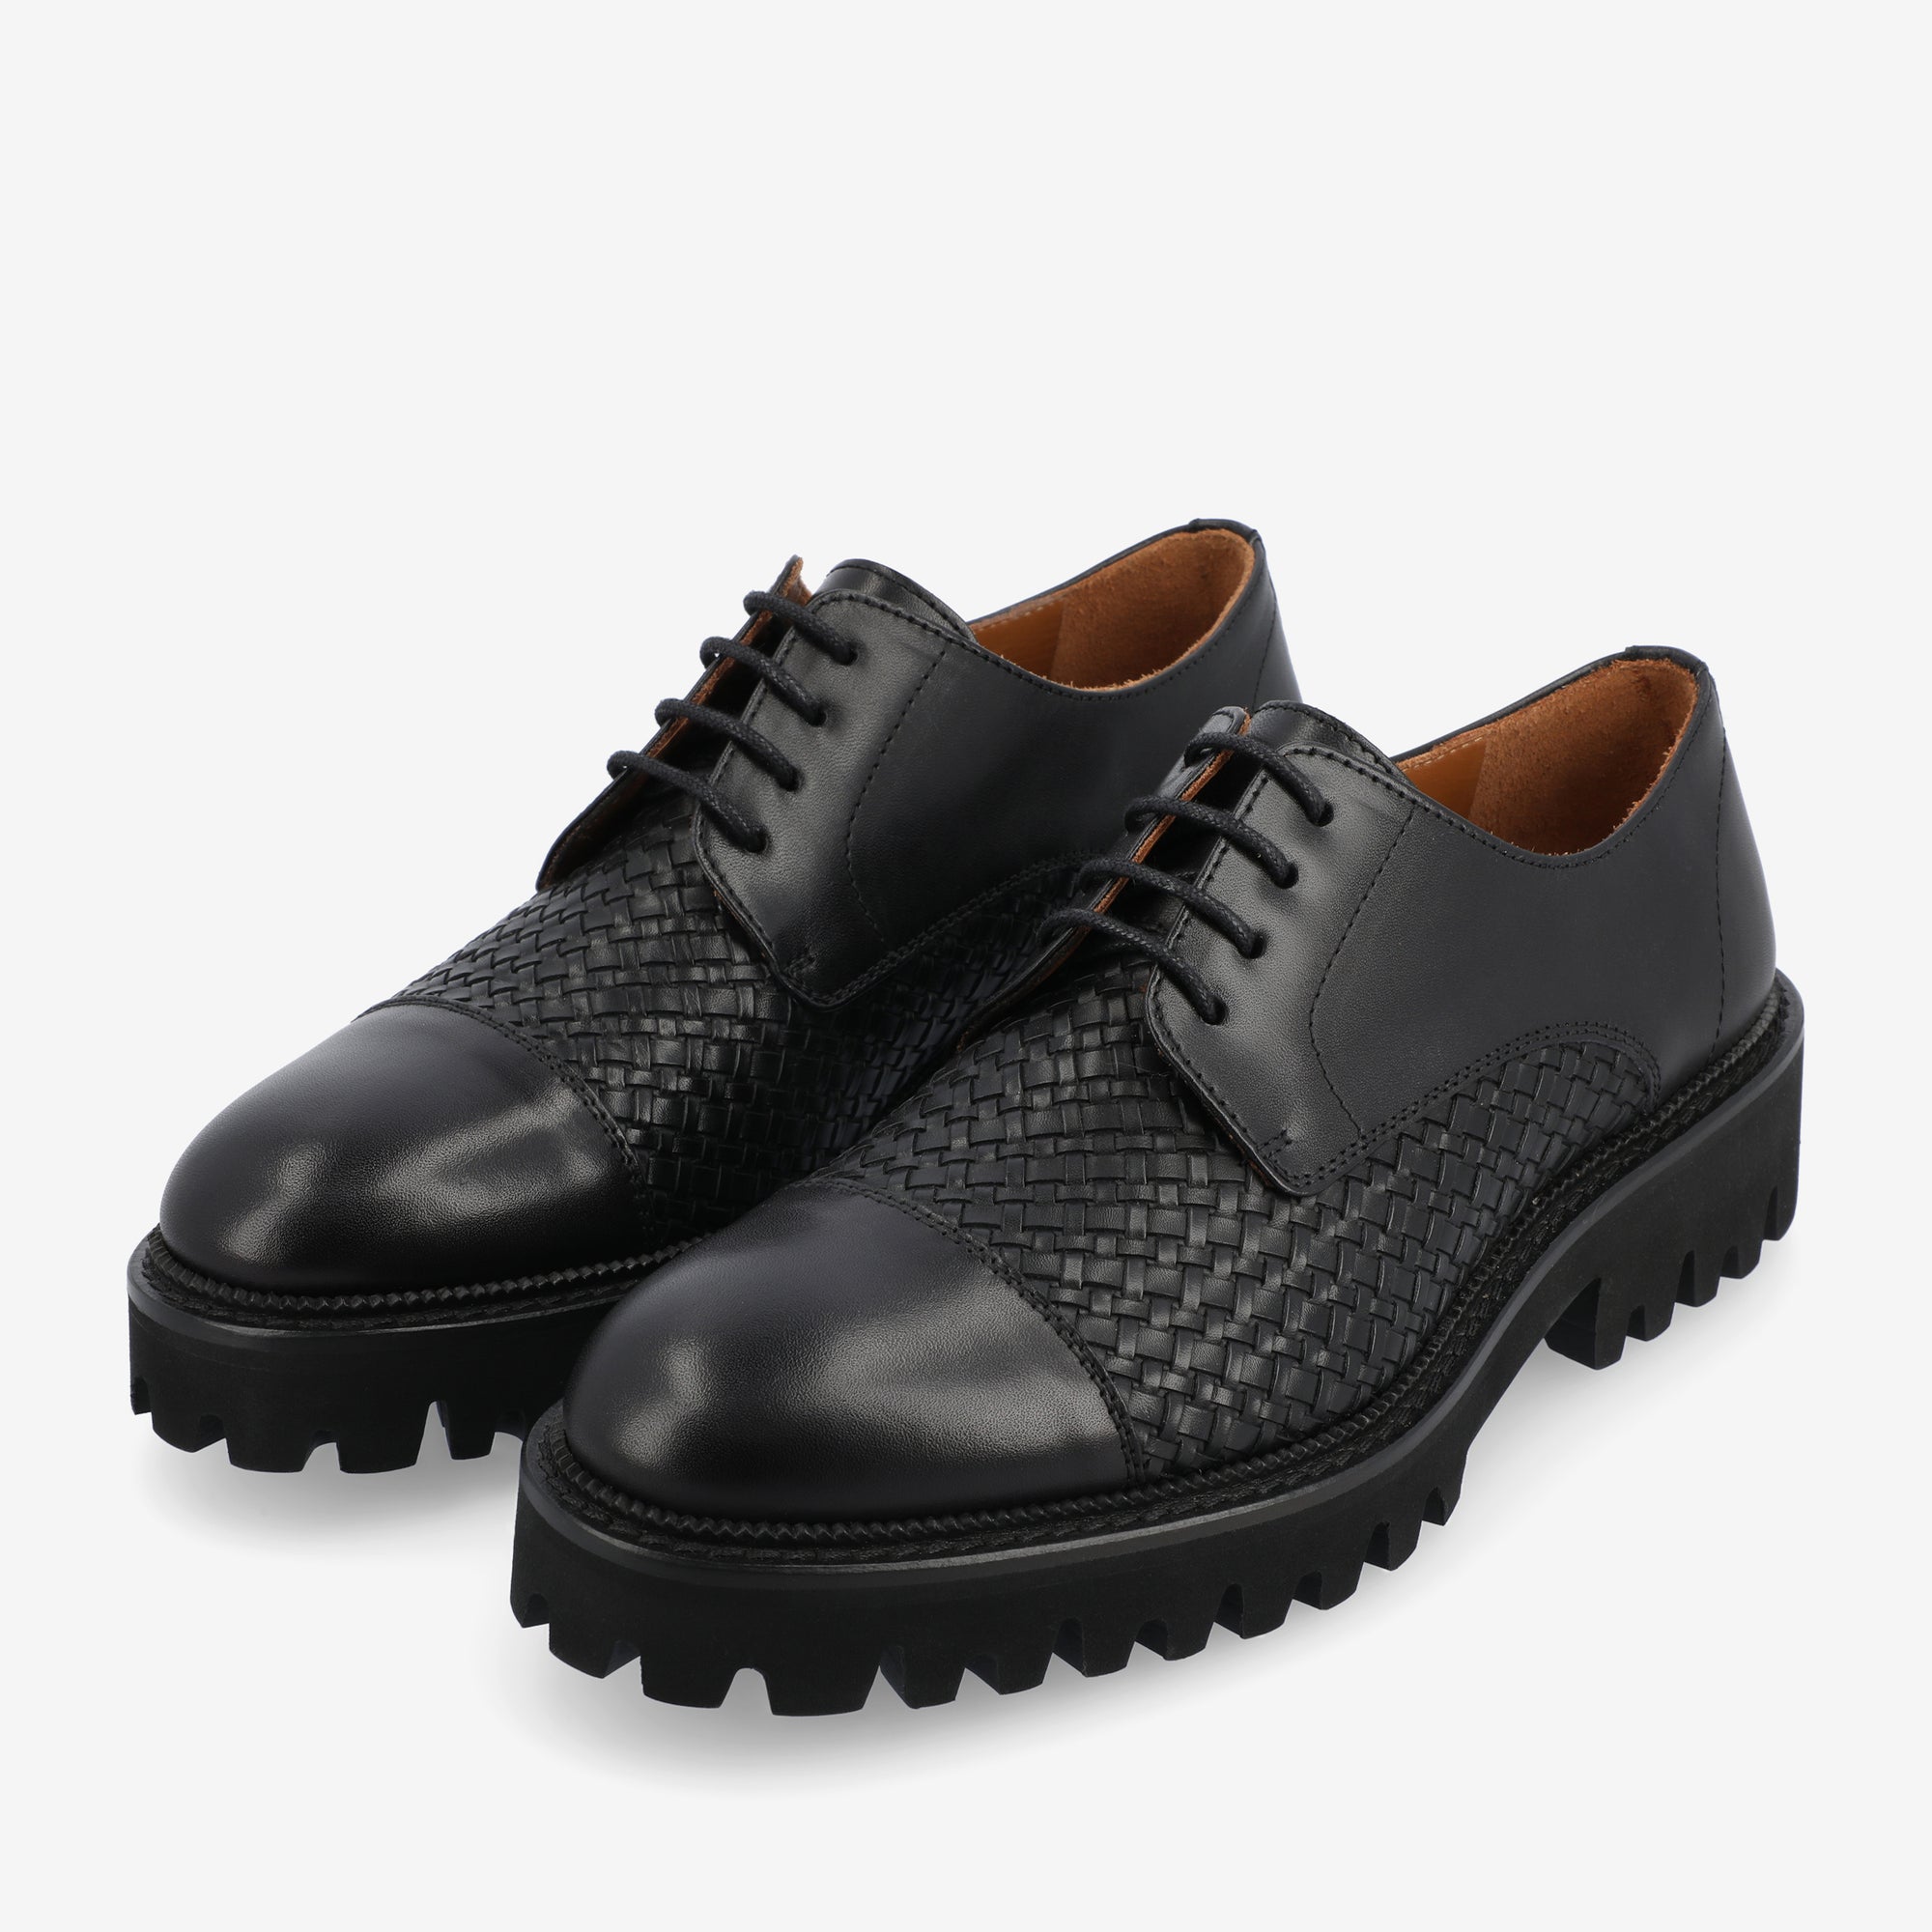 The Lucia Shoe in Black Woven